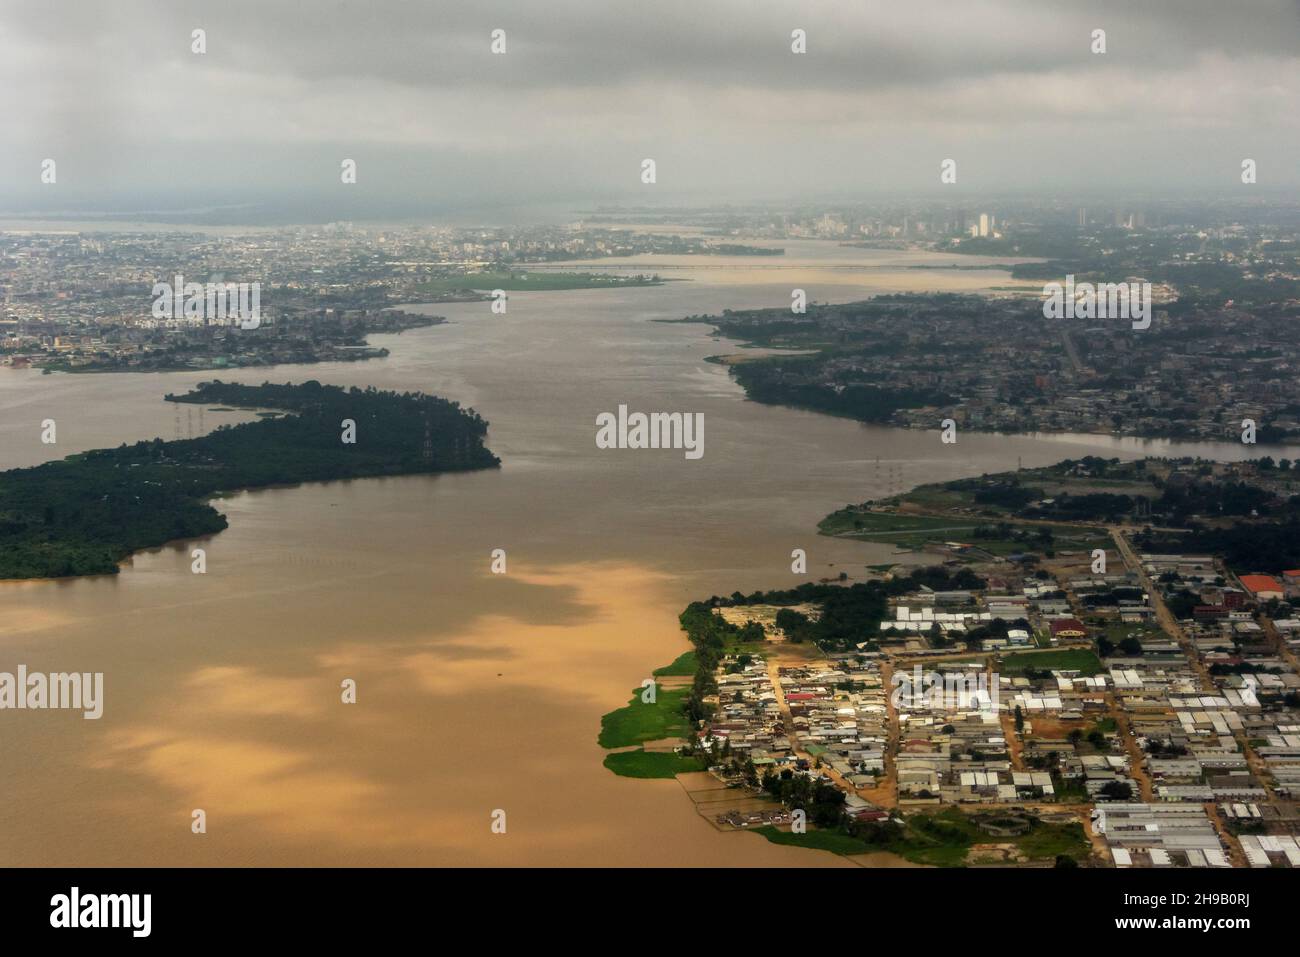 Aerial view of Abidjan, Cote d'Ivoire (Ivory Coast) Stock Photo